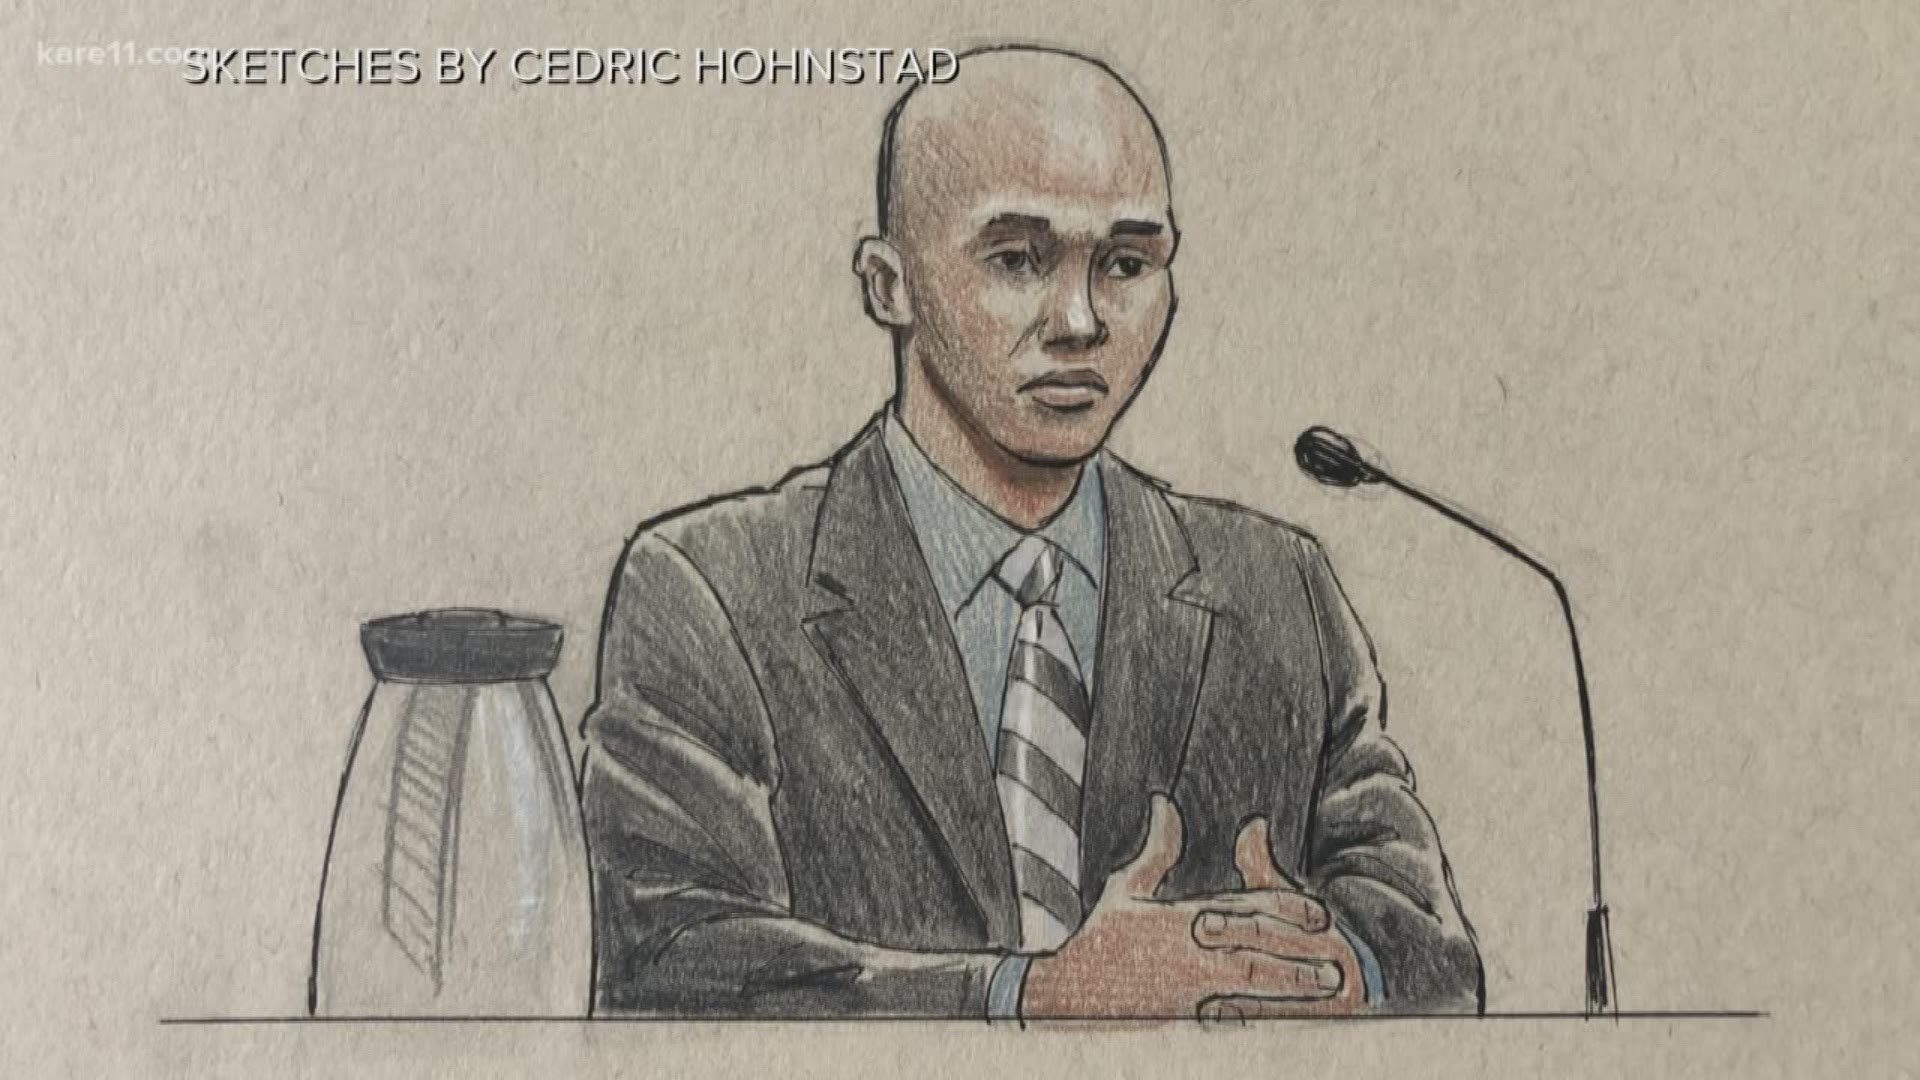 Former Minneapolis police officer Mohamed Noor took the stand to testify in his own defense Thursday afternoon.